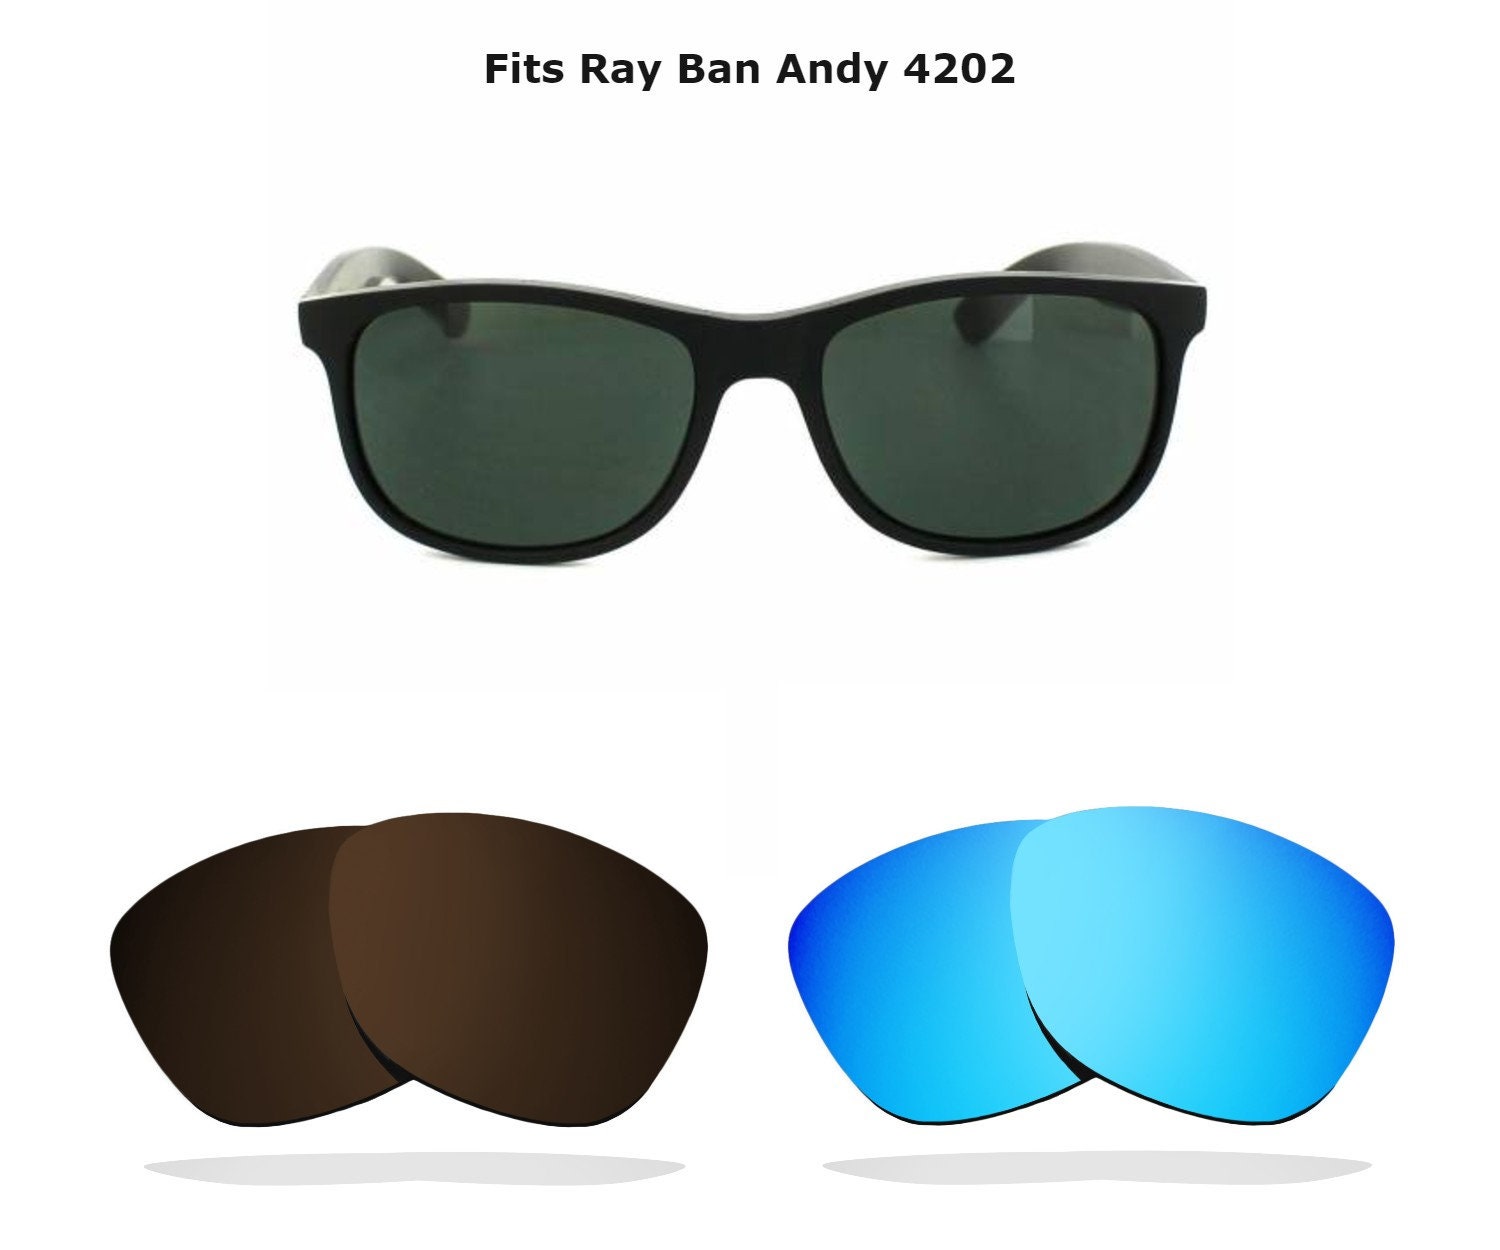 Fits Ray Ban Andy 4202 Polarized Sunglass Lens Spectacle Lens - Etsy